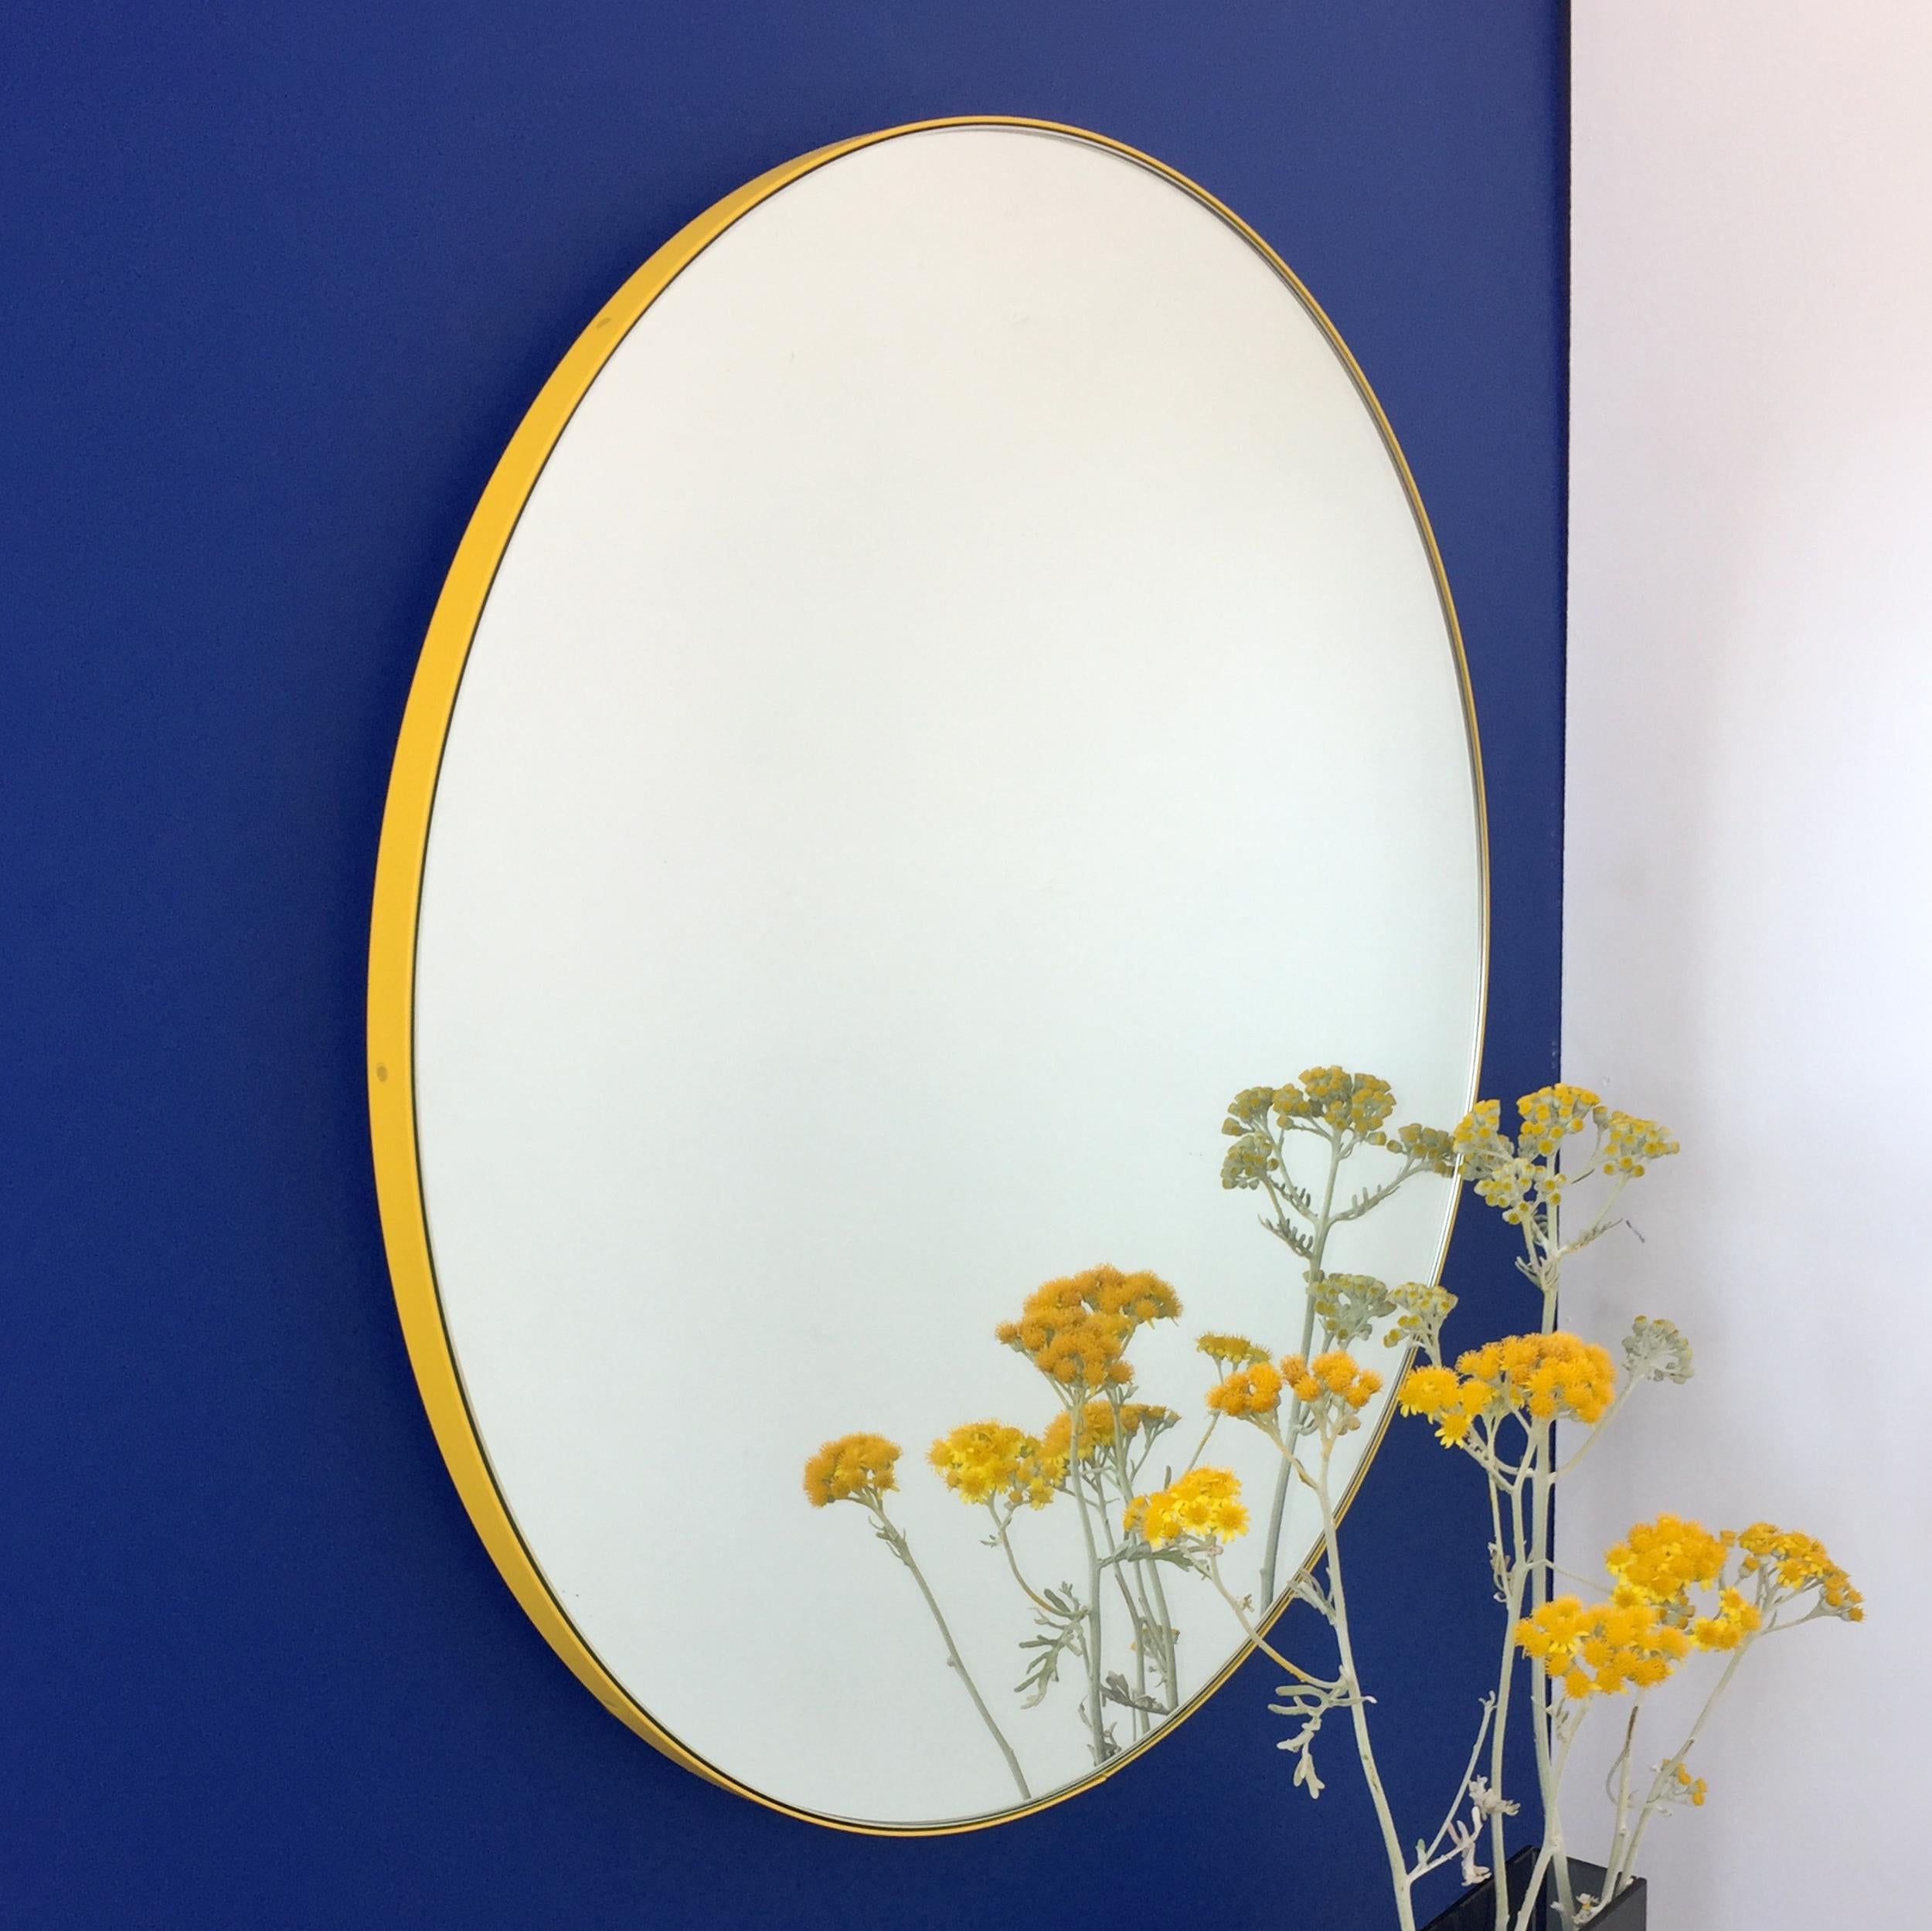 British Orbis Round Modern Handcrafted Mirror with a Yellow Frame, XL For Sale